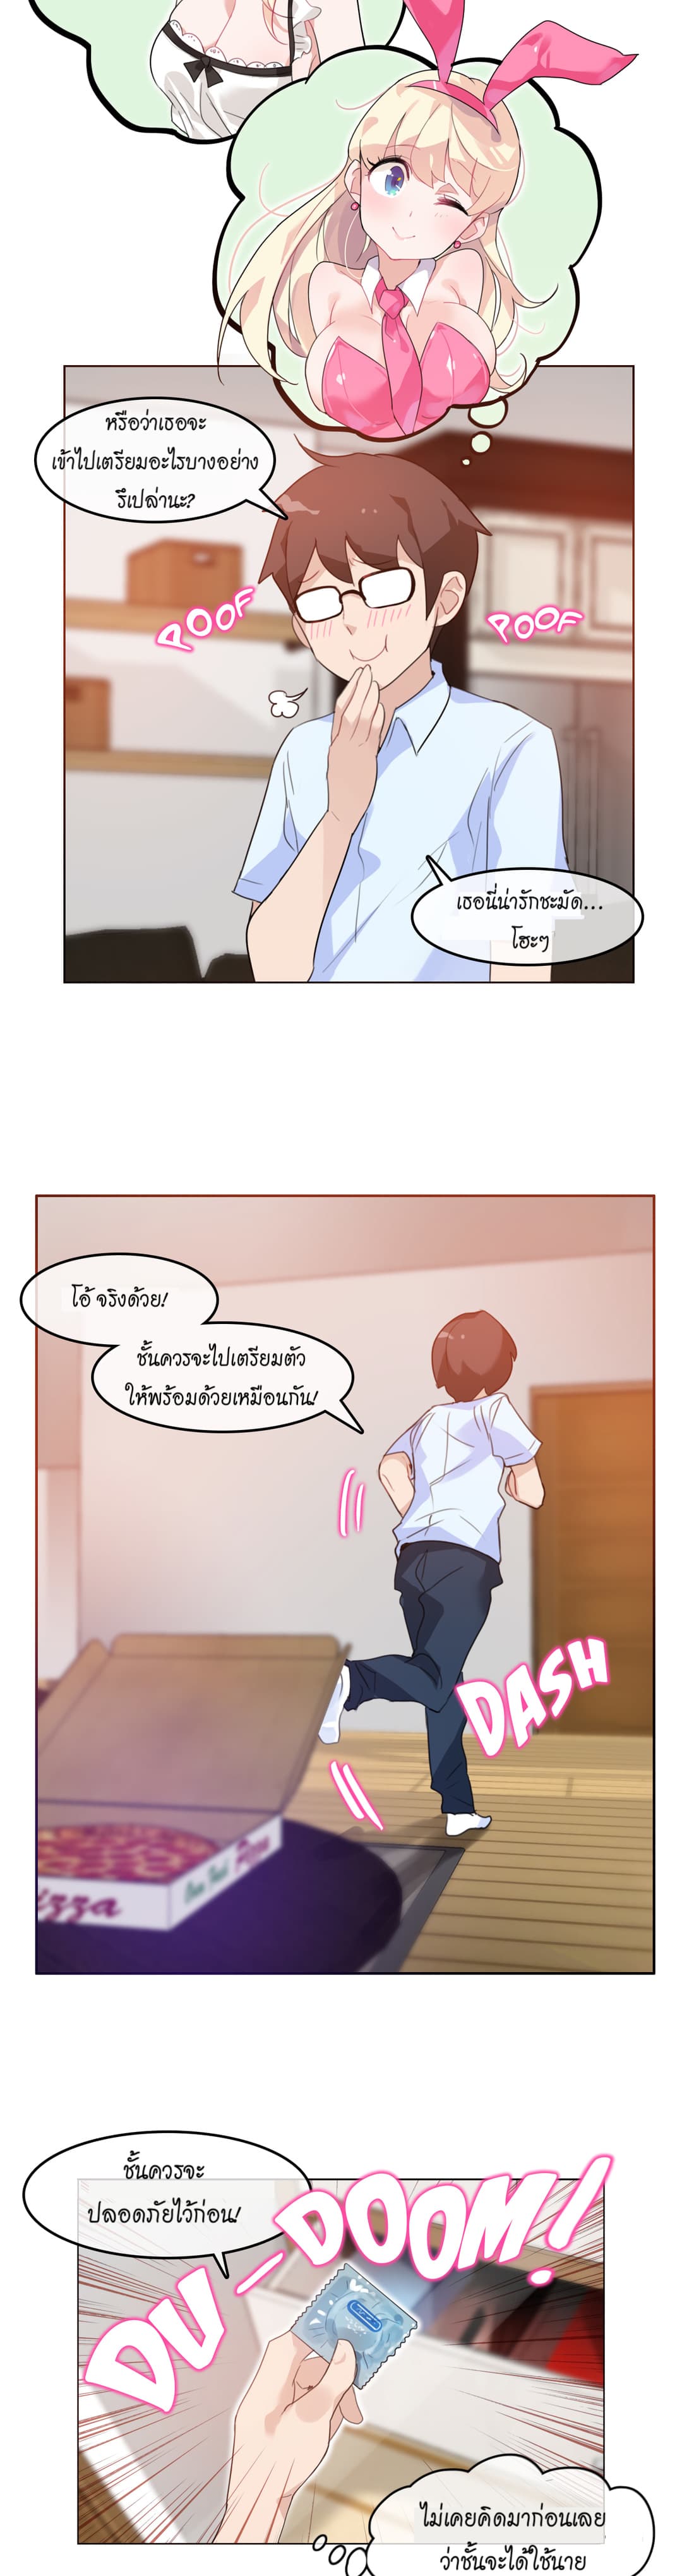 A Pervert’s Daily Life 11 (10)